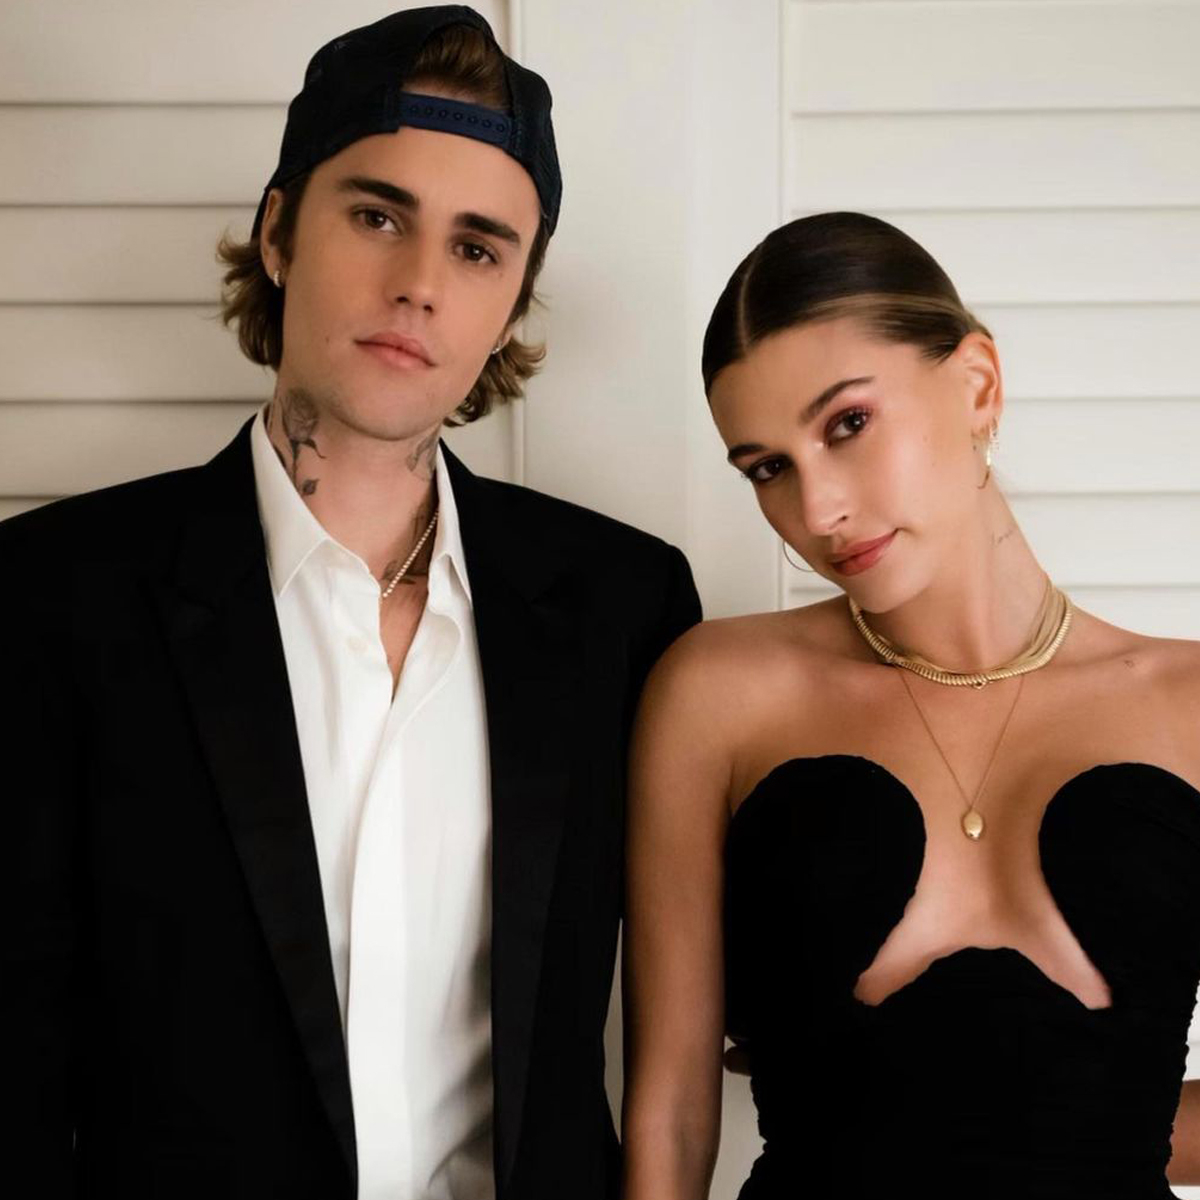 Hailey Bieber Is Justins Muse In Intimate Music Video For “anyone”